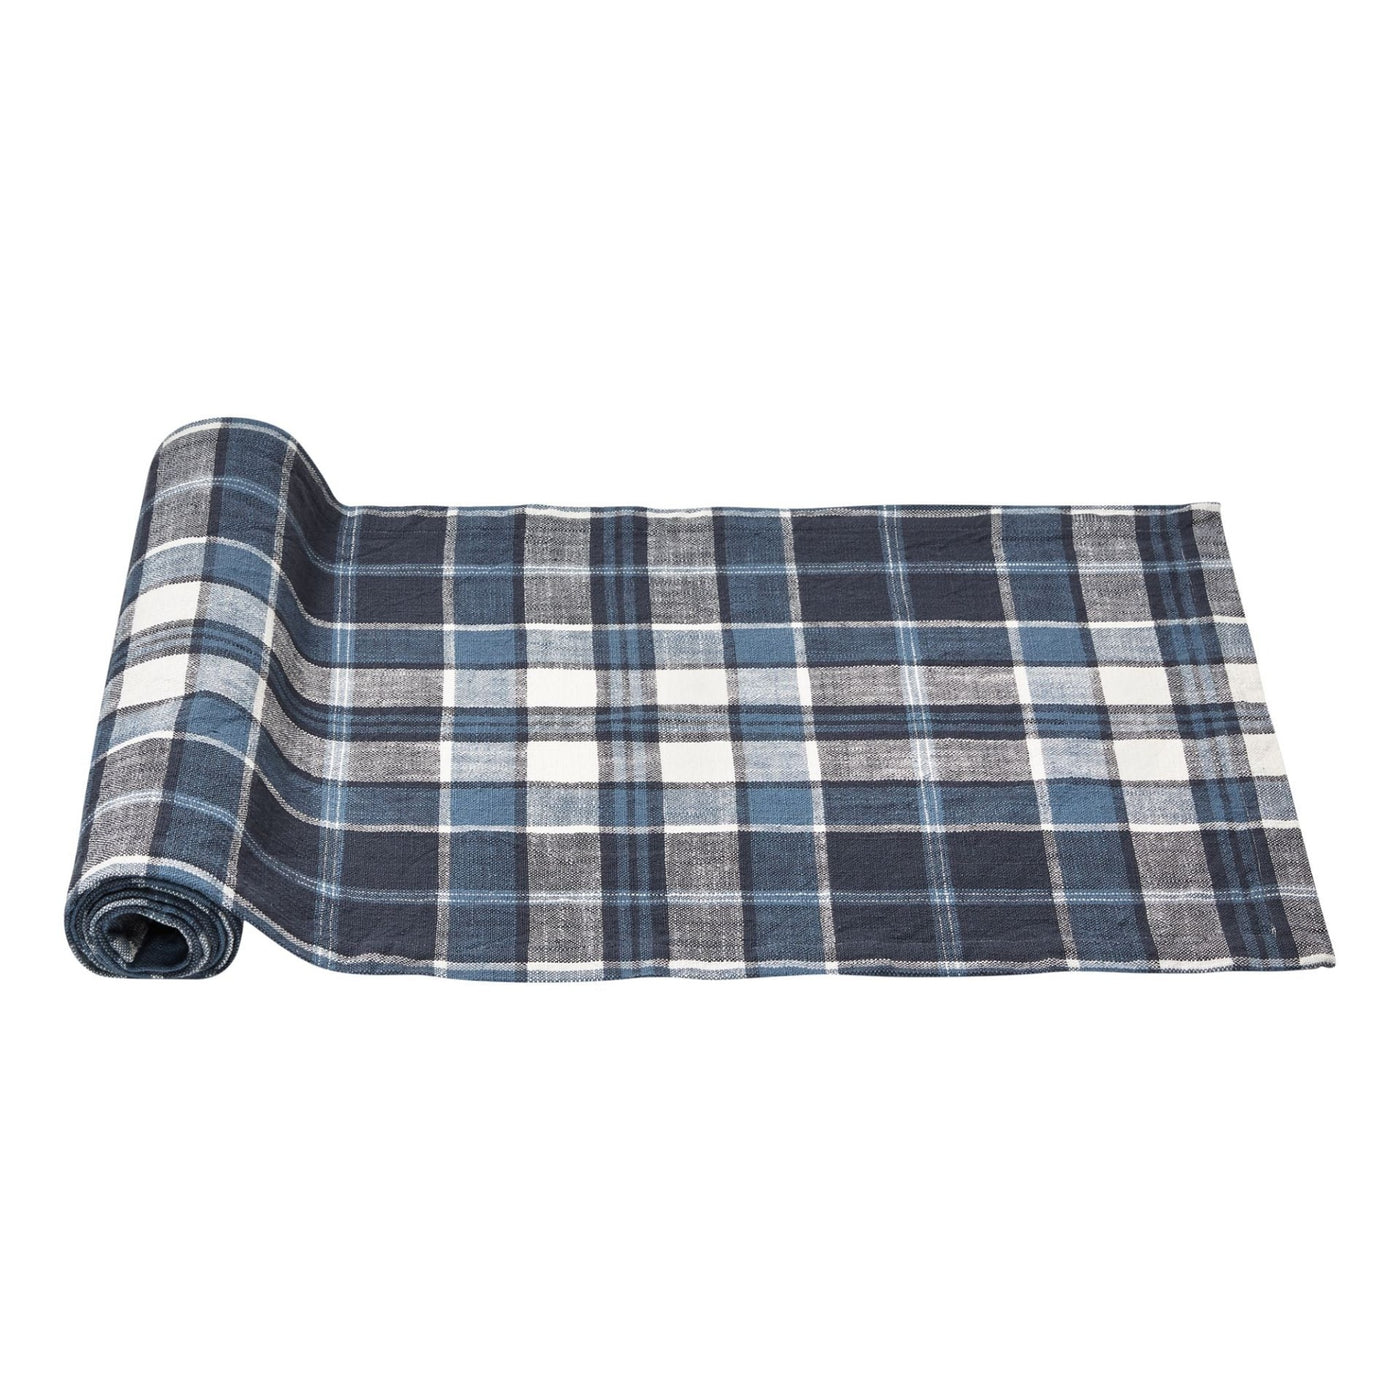 Mirage Blue Plaid Table Runner